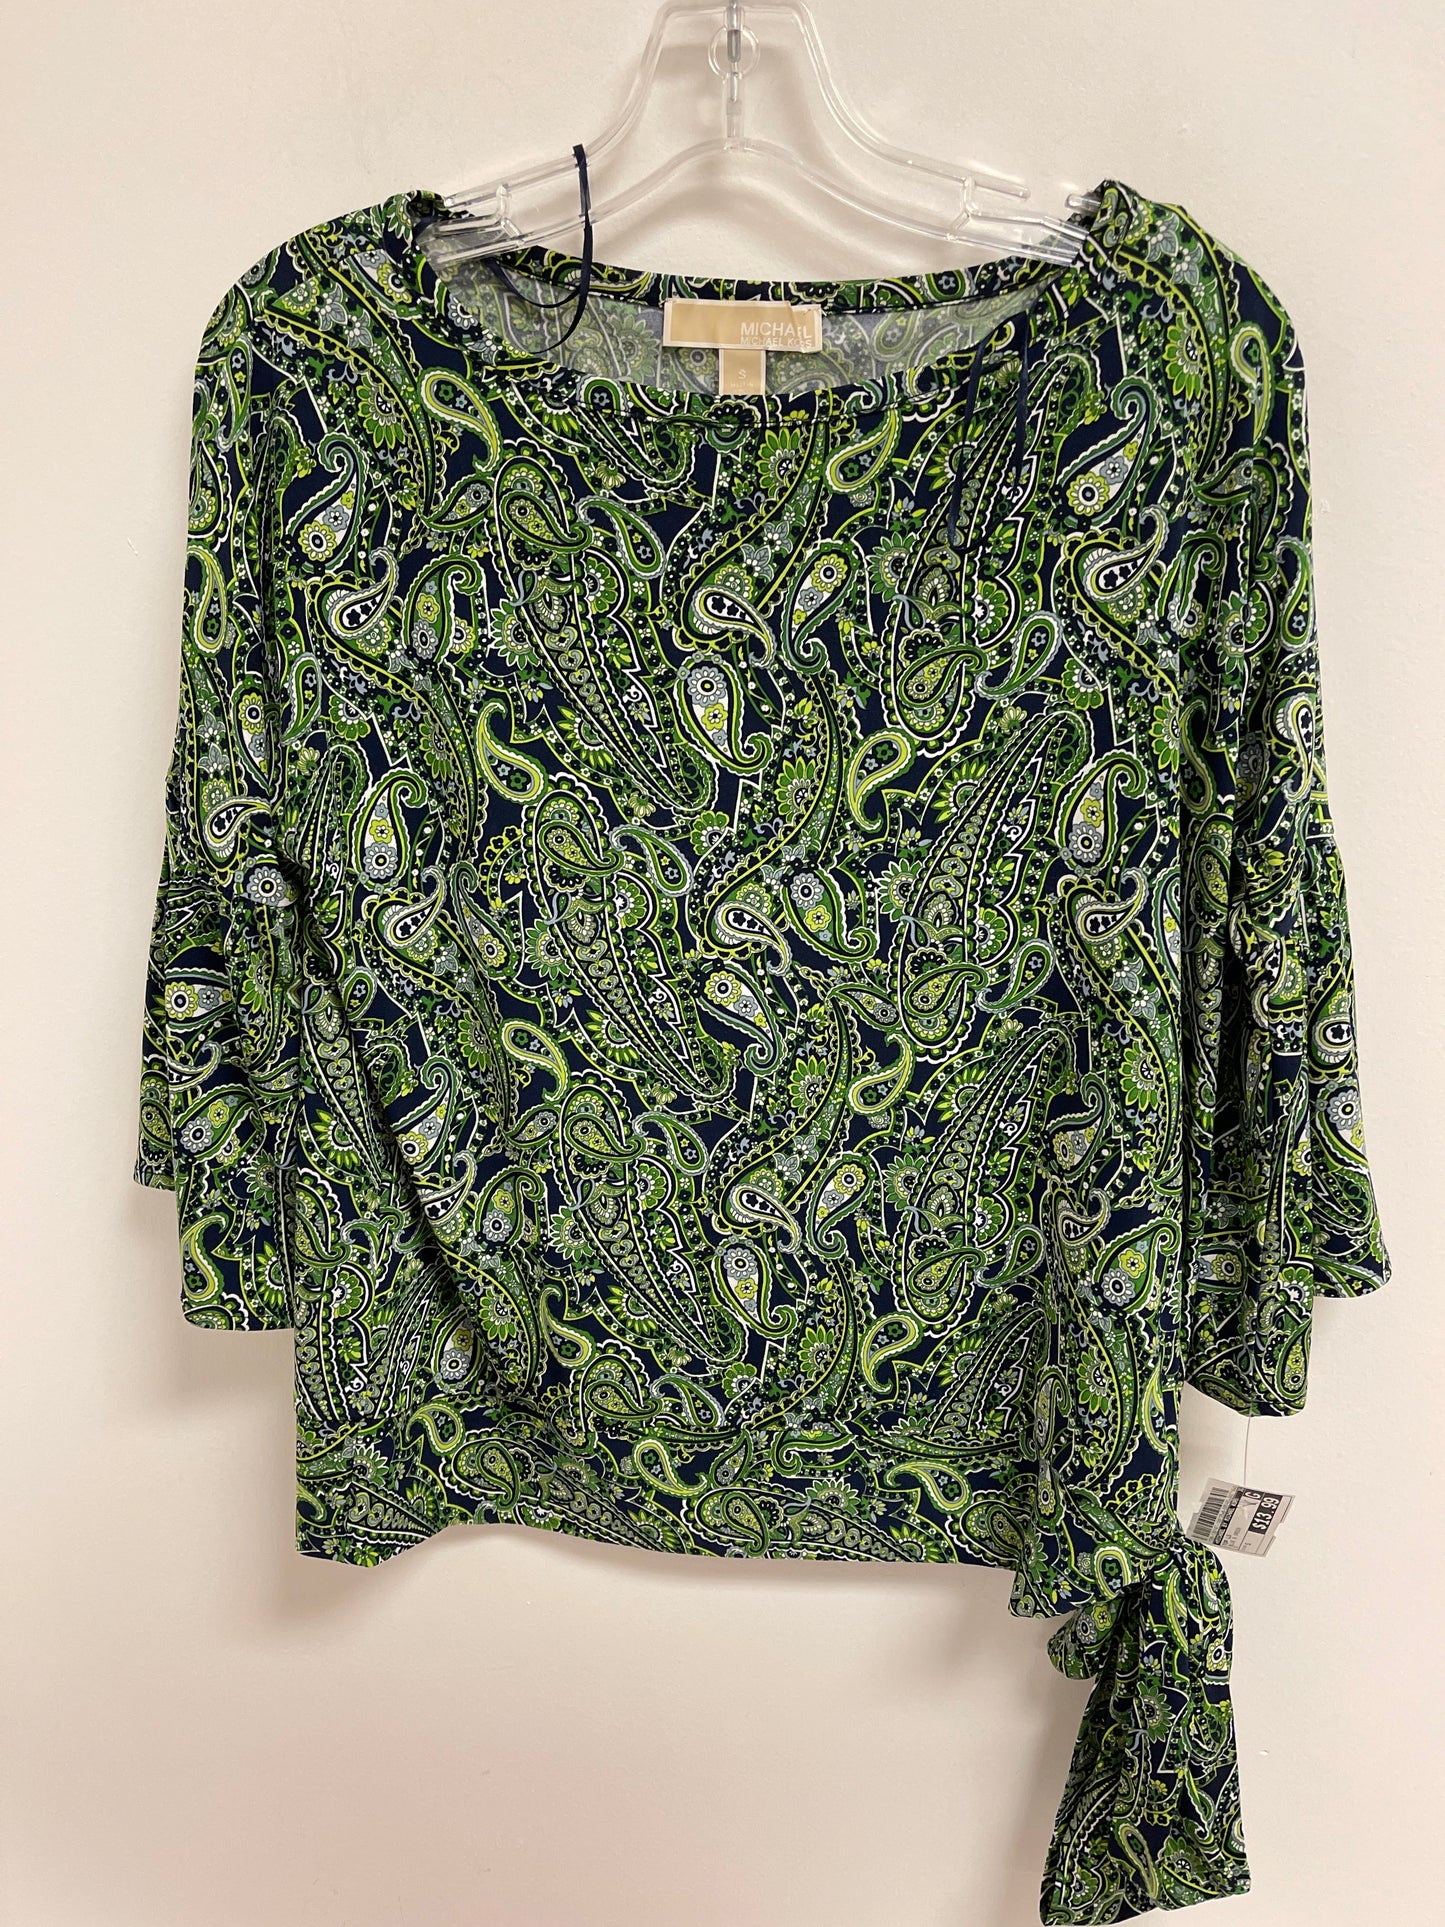 Blue & Green Top Long Sleeve Michael By Michael Kors, Size S